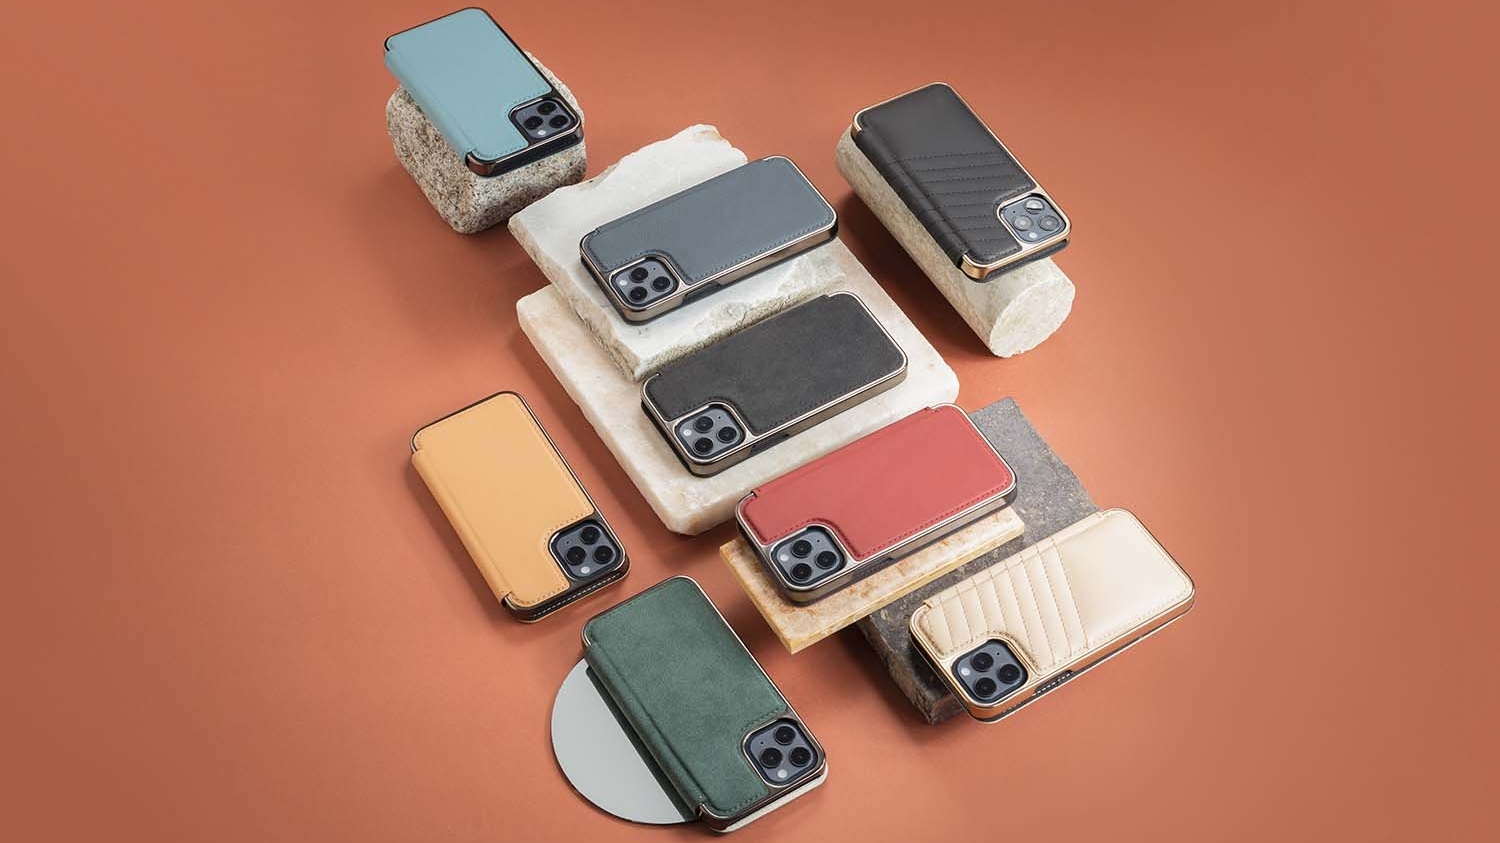 The best iPhone 12 Mini cases and covers